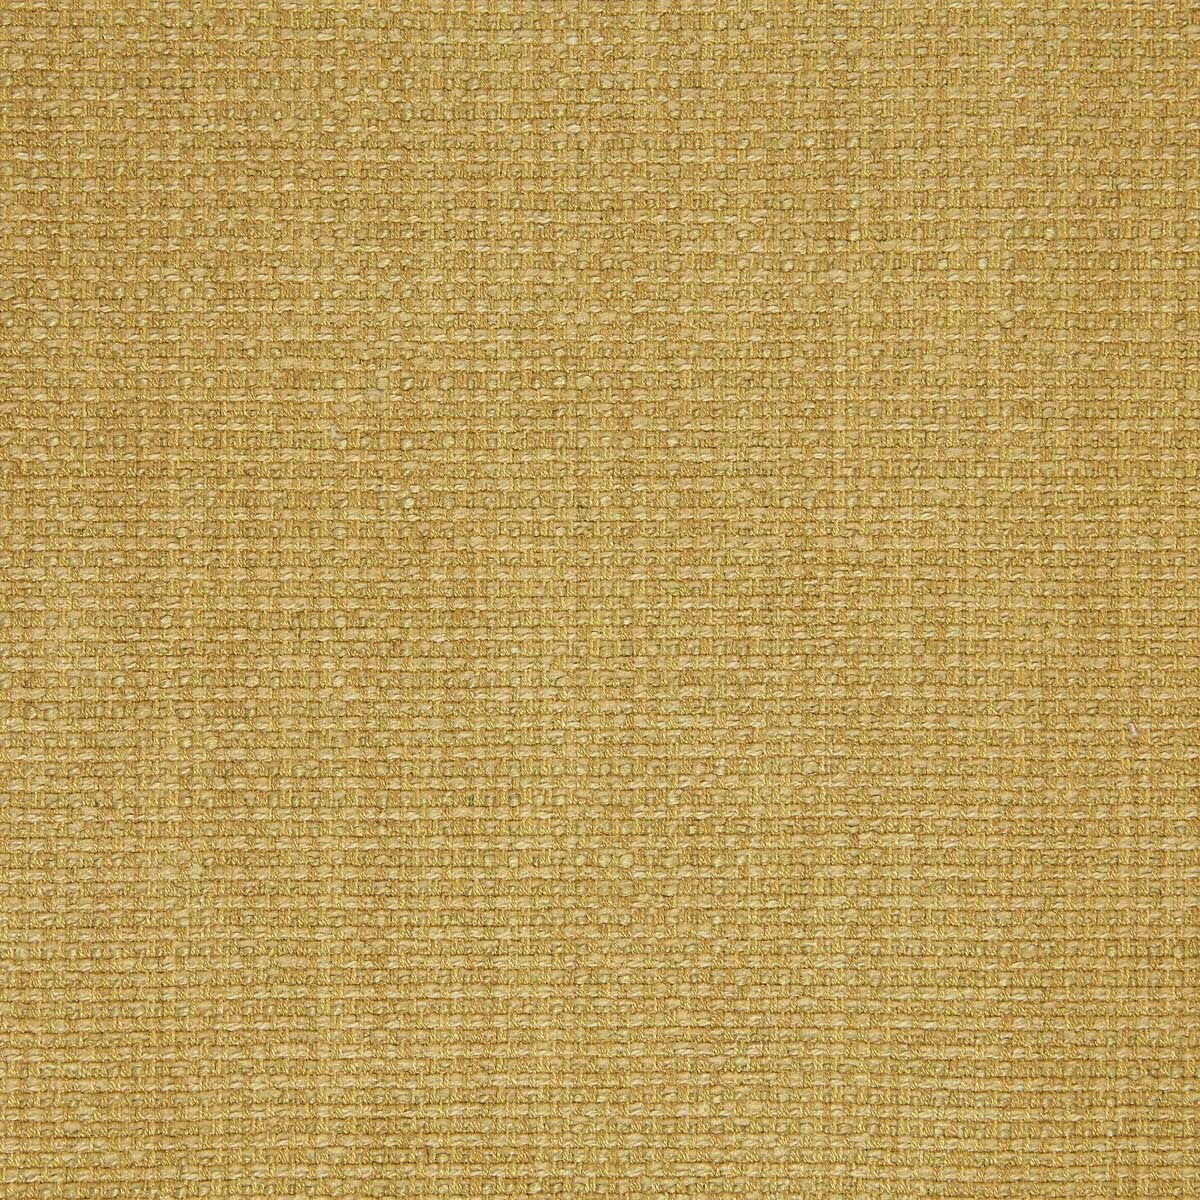 Godai fabric in 5 color - pattern LZ-30349.05.0 - by Kravet Design in the Lizzo collection